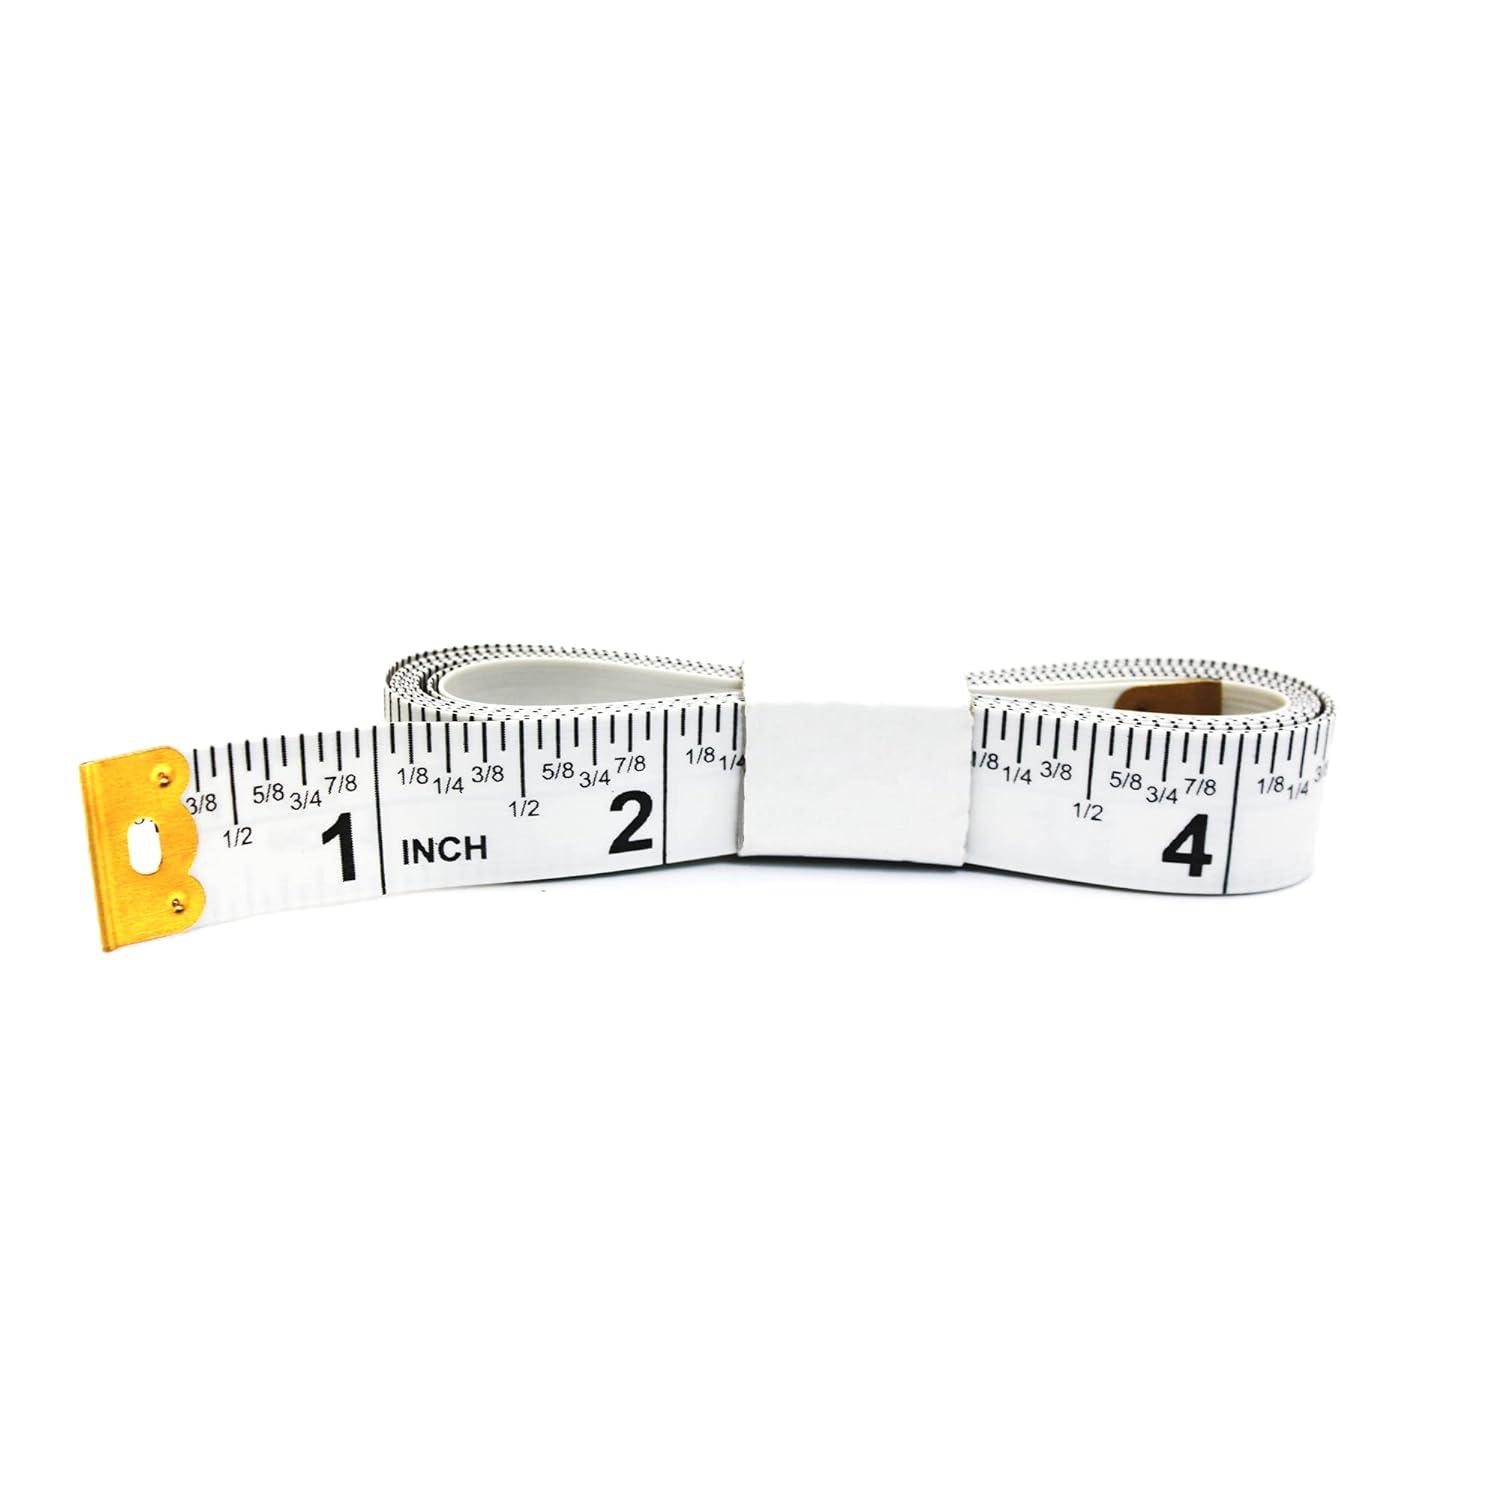  Perfect Measuring Tape- Fraction Tape Measure, All-Purpose Tape  Measure-Double Sided Fractional Inches & Millimeter/Centimeter Tape Measure  (10 Pack- 60in - White) : Arts, Crafts & Sewing